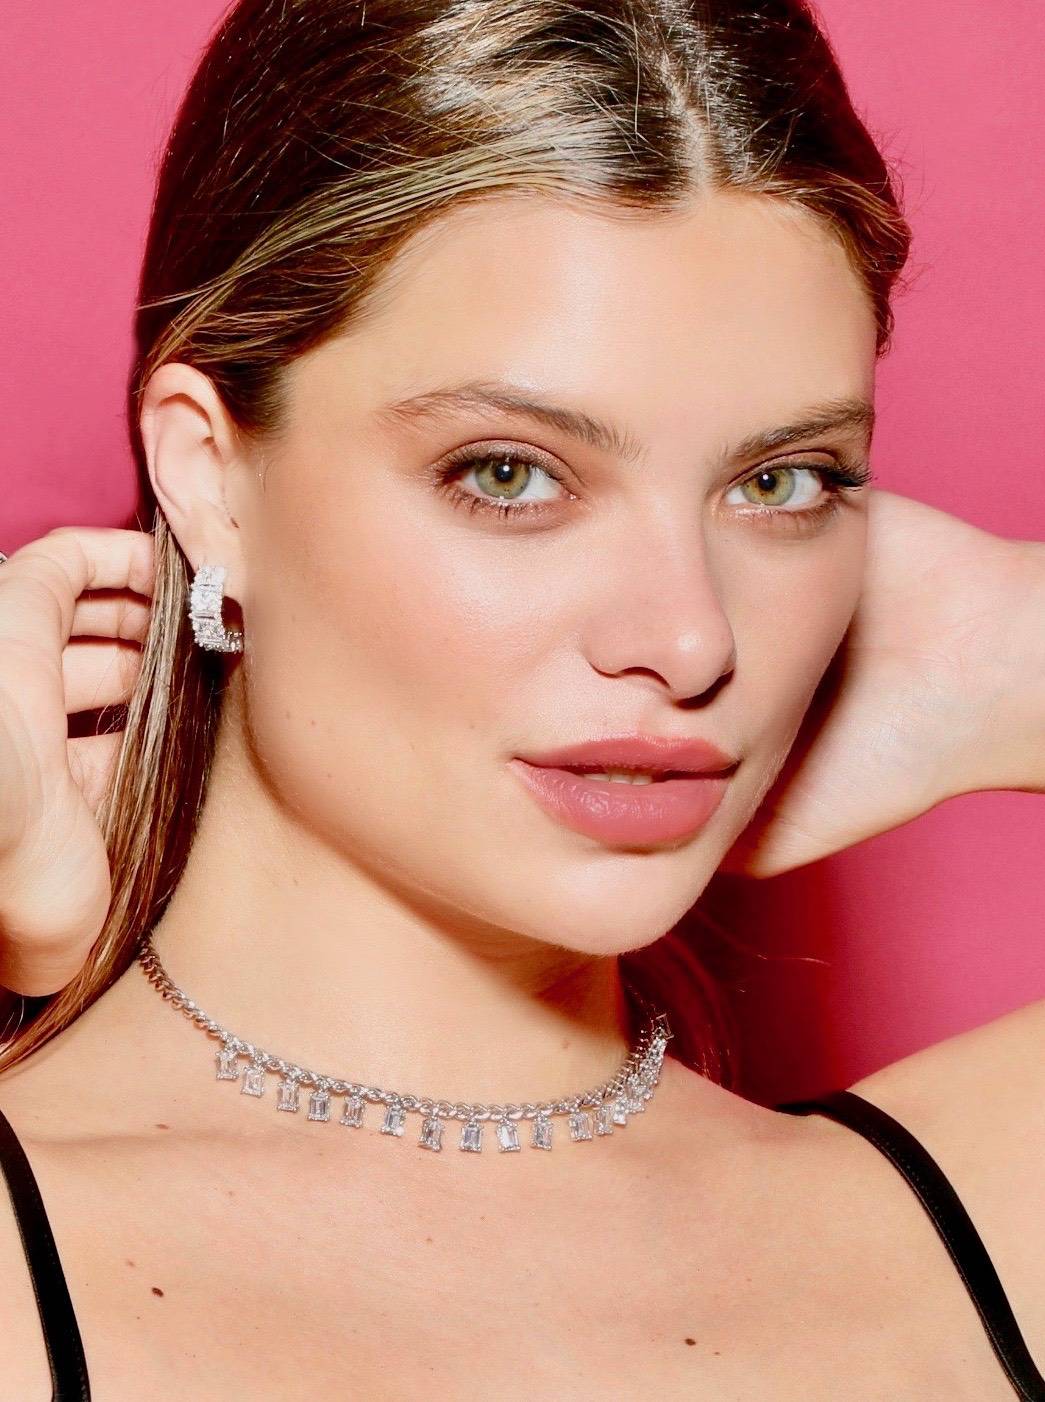 Crystal Huggie Earrings And Crystal Choker Necklace On Model